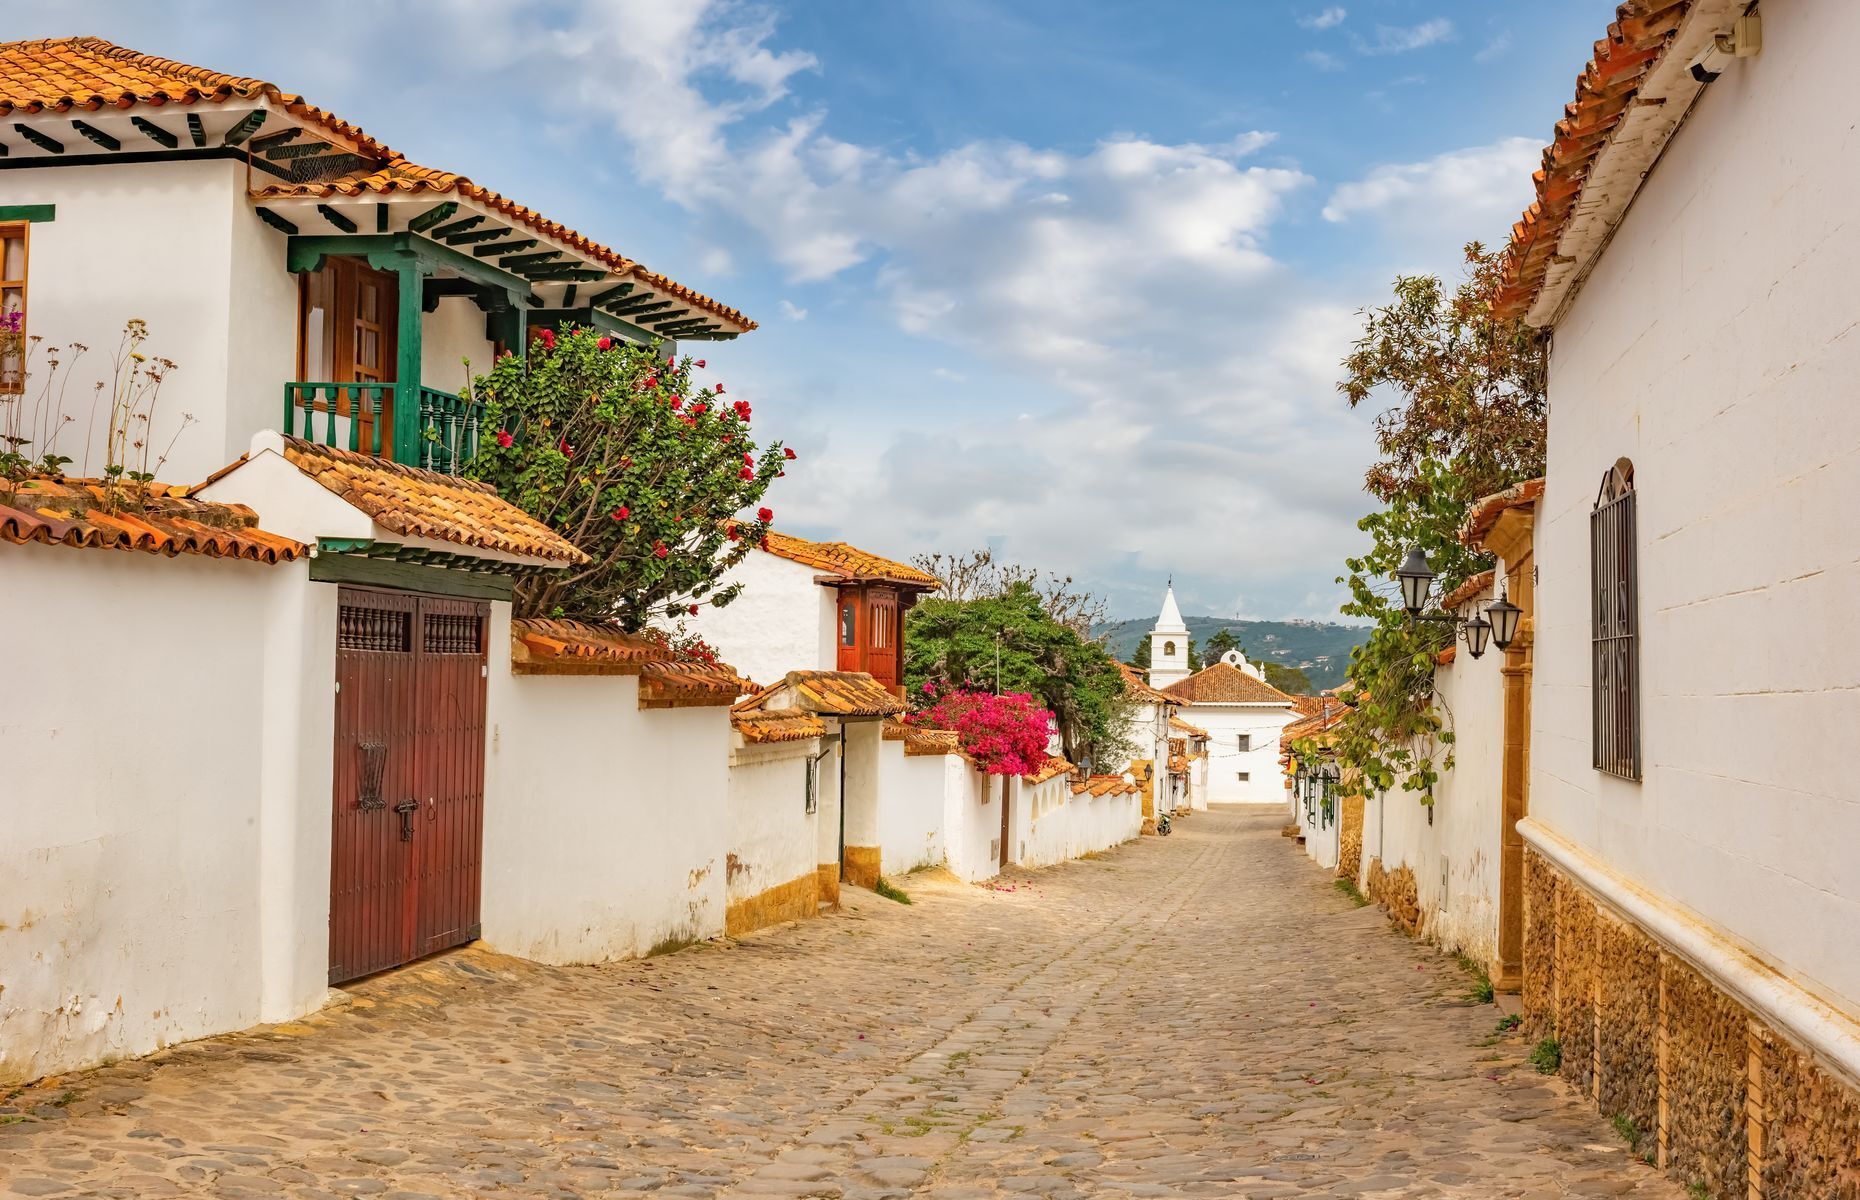 <a href="https://colombia.travel/en/villa-de-leyva" rel="noreferrer noopener">Villa de Leyva</a>, one of the most beautiful cities in Colombia. Located a mere three-hour drive from Bogotá, a stroll through its charming streets will allow you to admire its colonial architecture and make you feel like you’ve travelled back in time. Make sure to check out Plaza Mayor, the largest Spanish square in the country. If you’re interested in paleontology, you’ll be delighted to learn that the area harbours many fossils from the Cretaceous era.